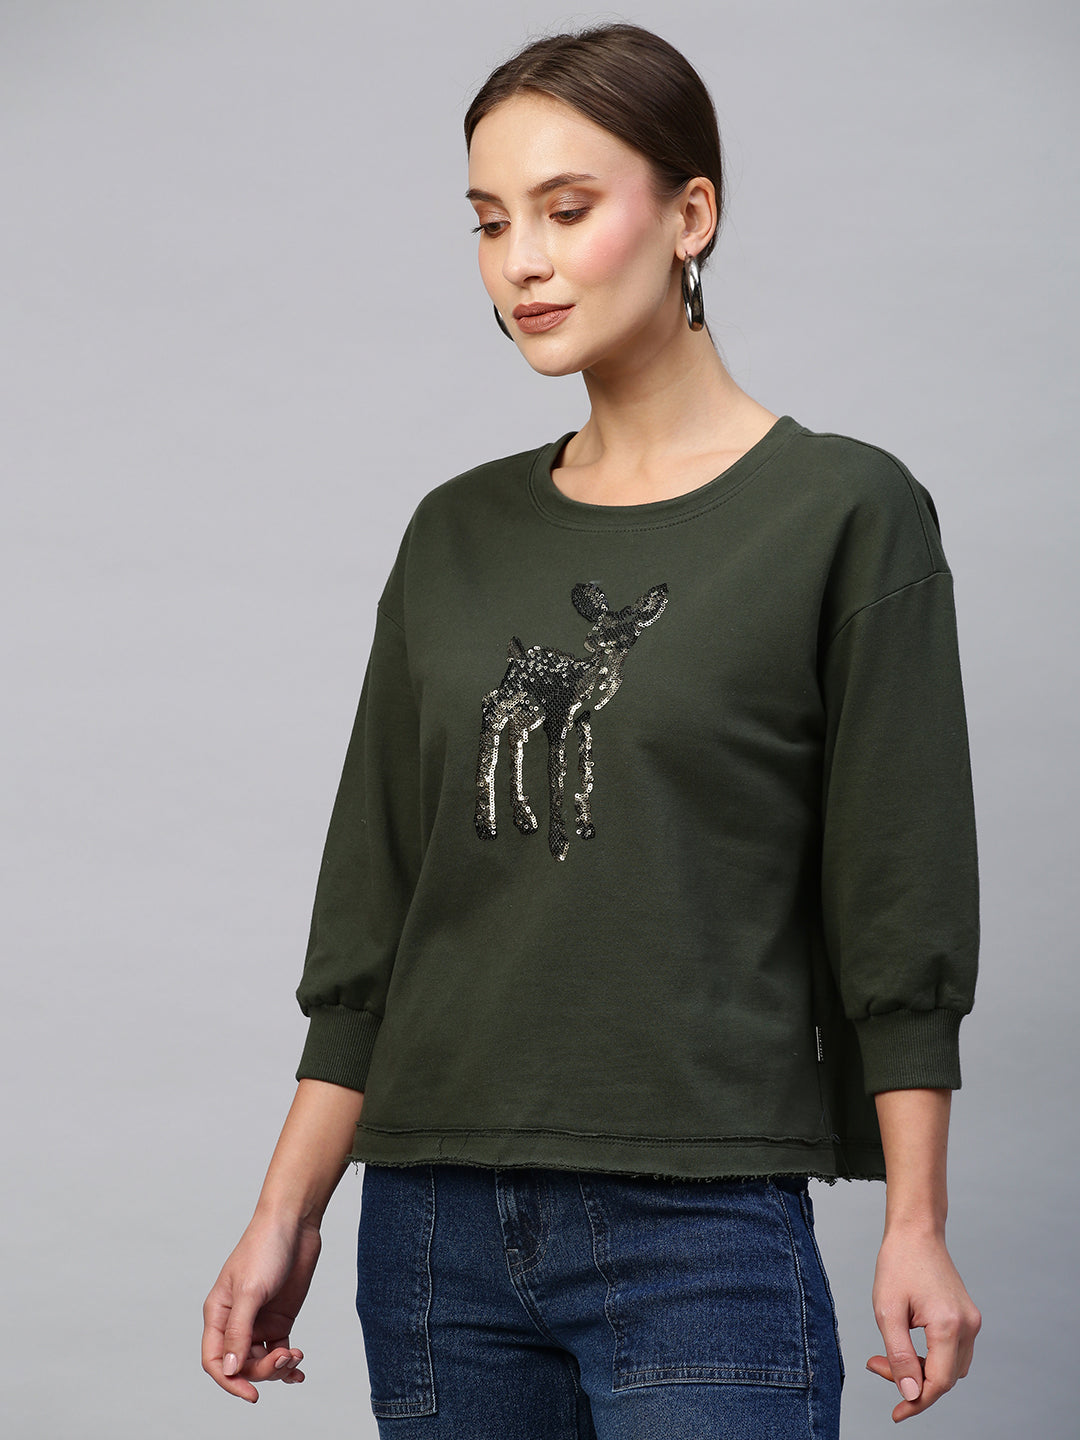 French Terry Sweatshirt With "Love" Sequinned Embroidery